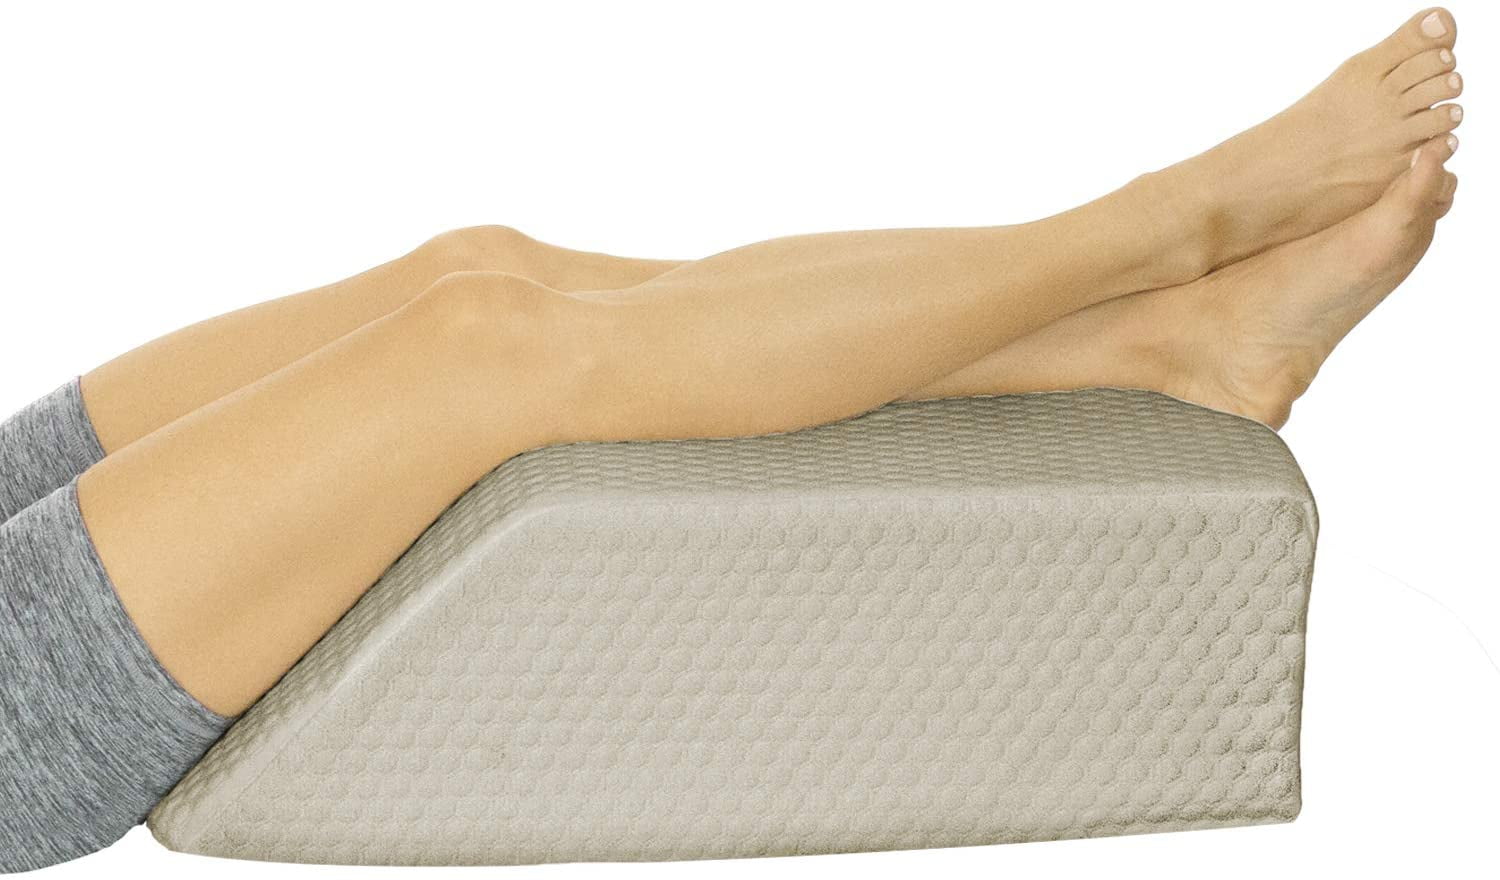 Elevation Pillow Leg Elevated Pillows Elevator Wedge for Foot Elevating Support Foam Cushion Post Surgery Rest Legs Knee Feet Ankle Injury Recovery Feet Elevate Cushions Stabilizer Wedges 